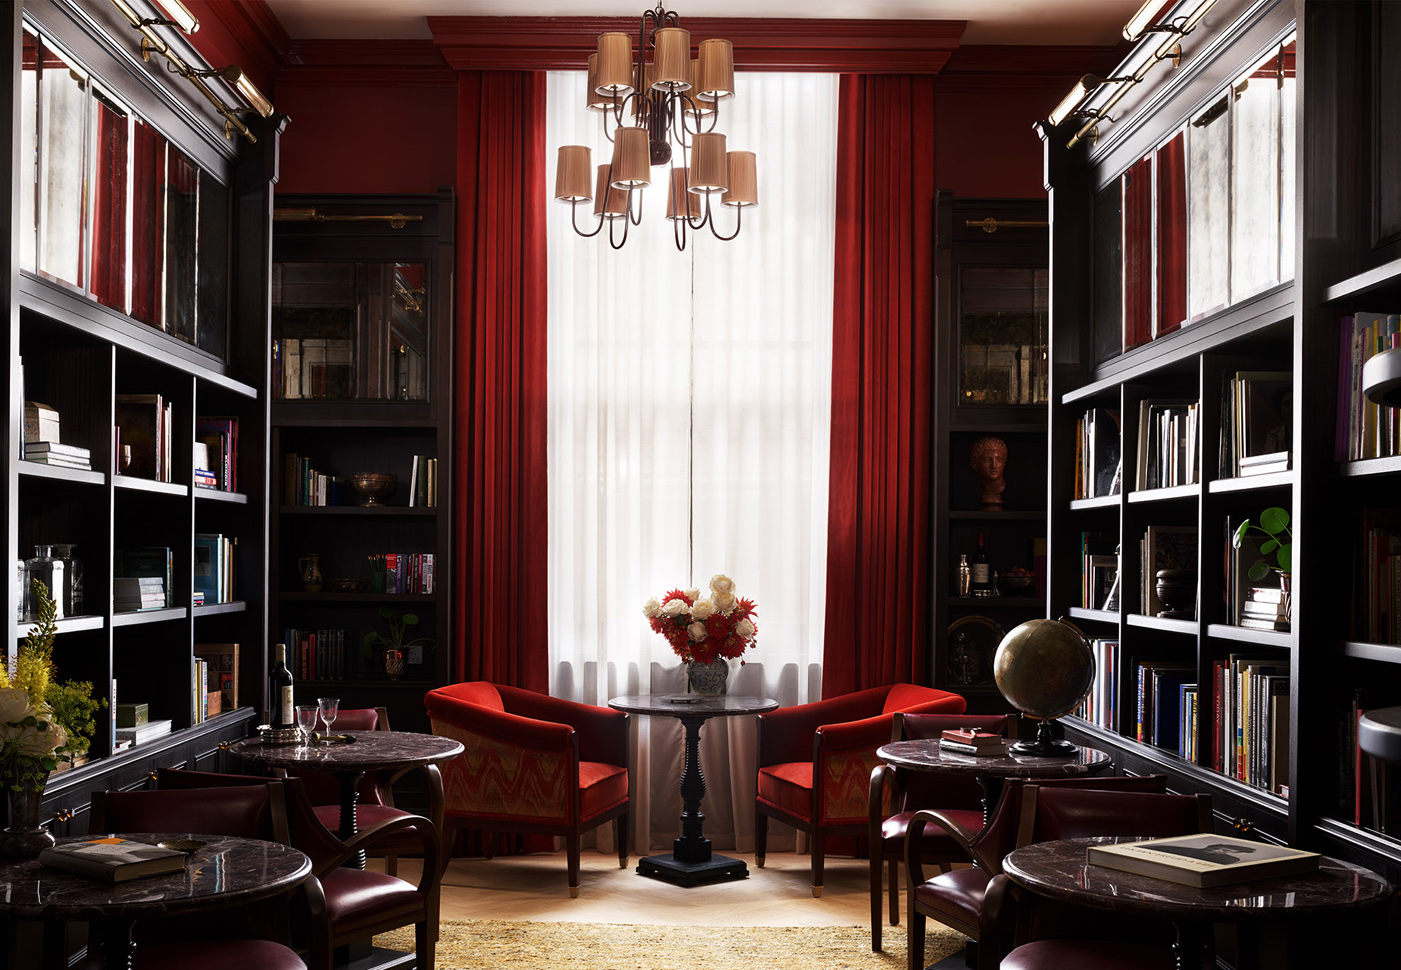 Elegant library dining room with a focus point on seating with large red chairs and floral center piece